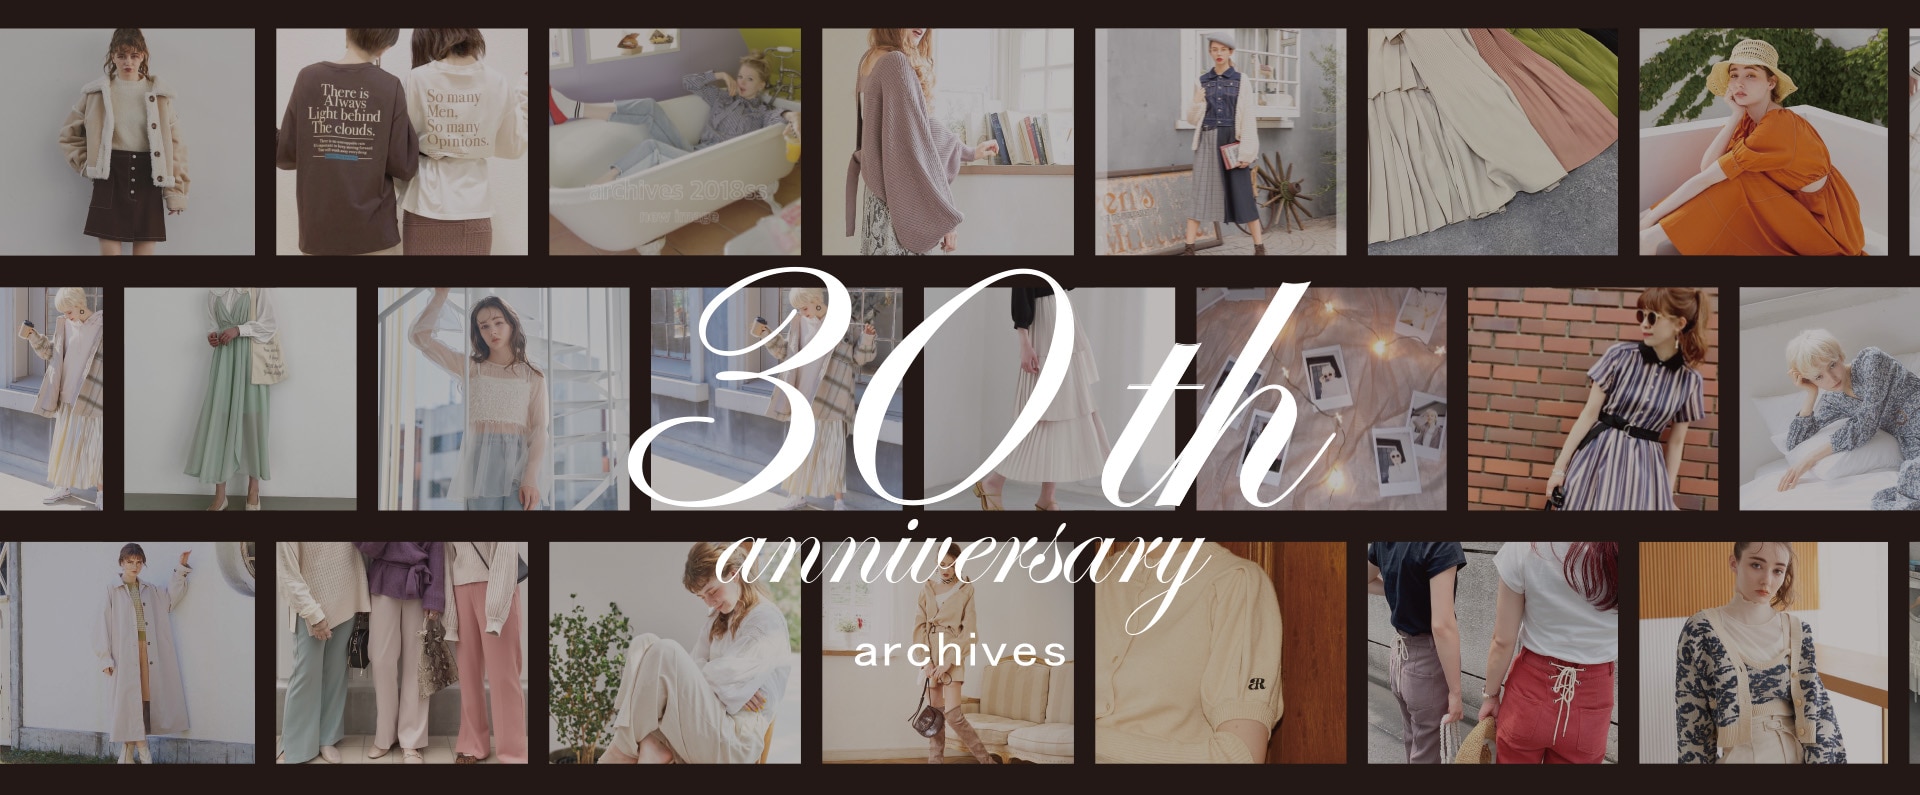 archives 30th anniversary